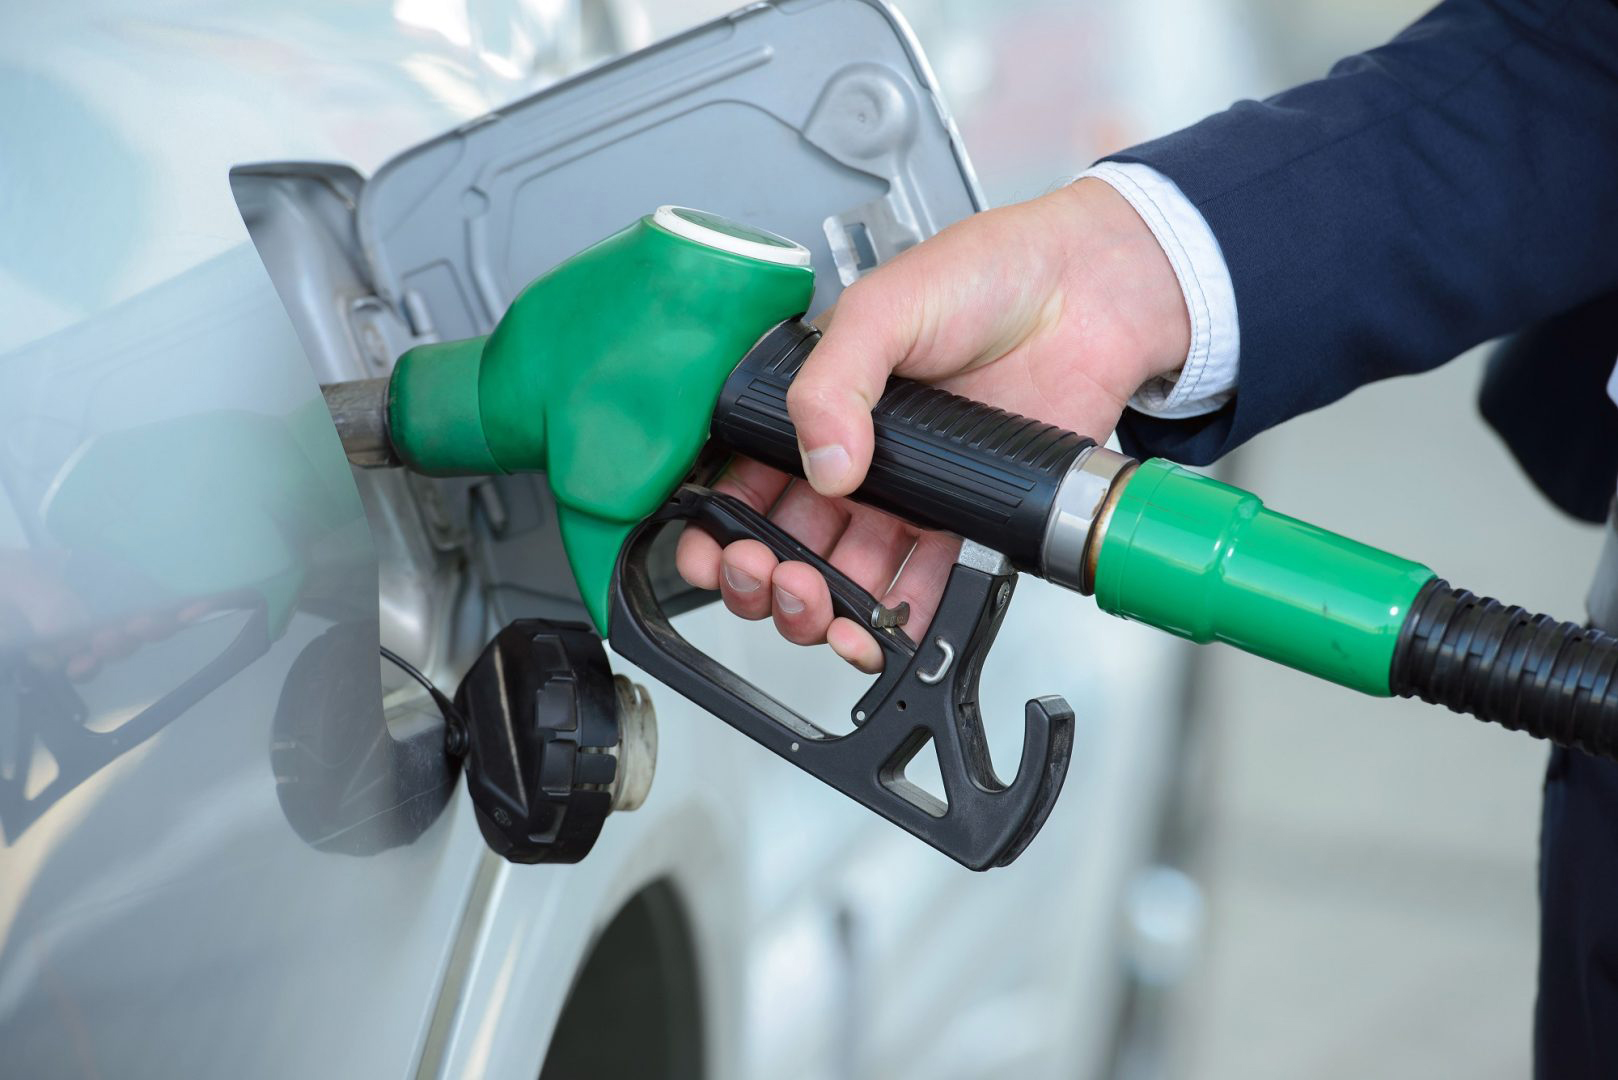 Fuel efficiency can be affected by the exhaust system fitted to a vehicle